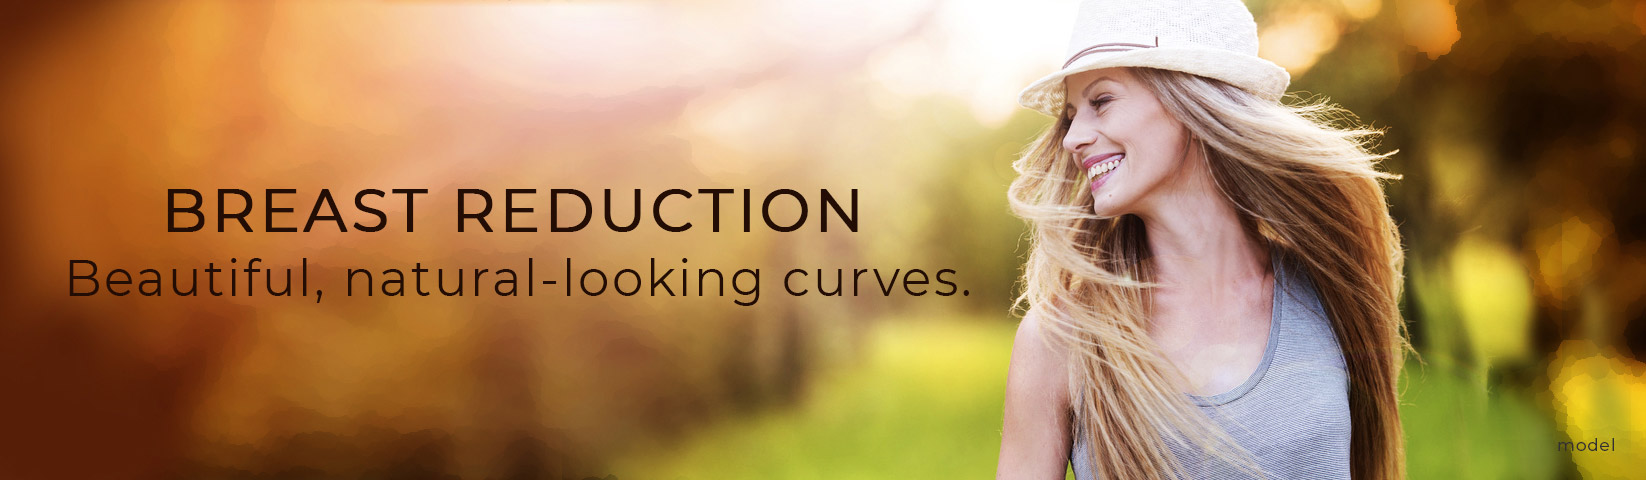 Breast Reduction: Beautiful, natural-looking curves